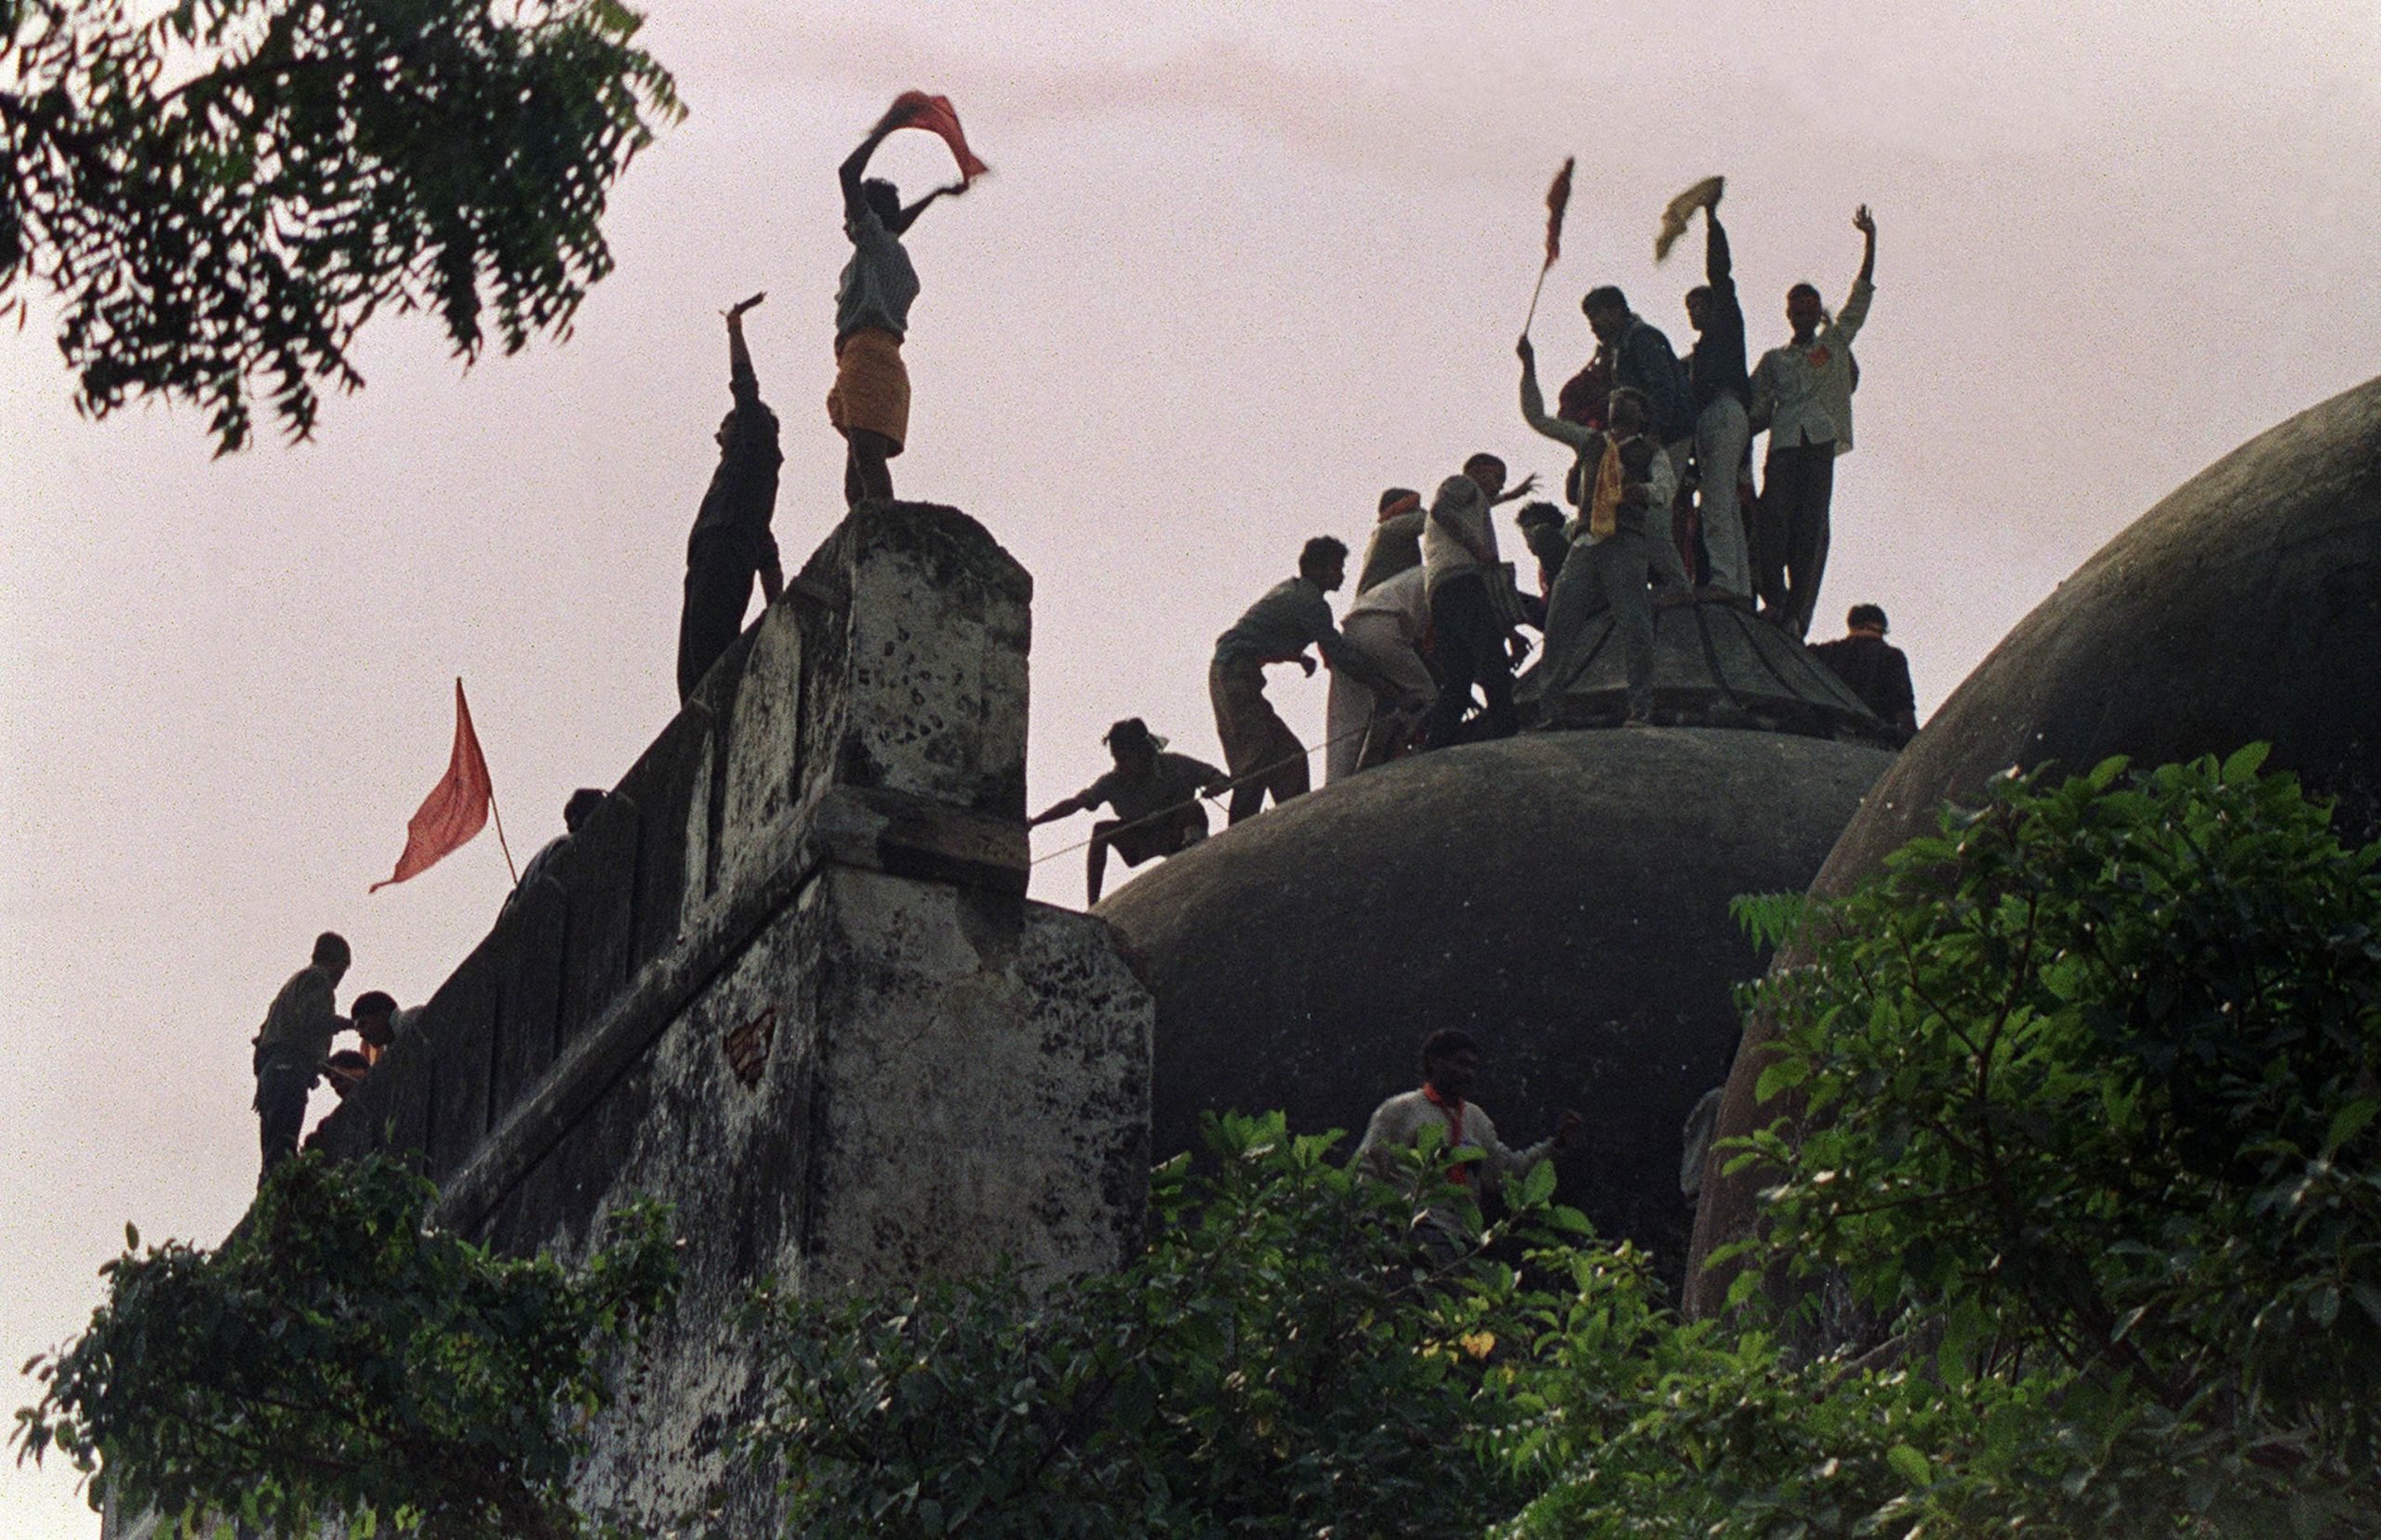 From 1528 to 1992: A timeline of events leading to demolition of Babri mosque